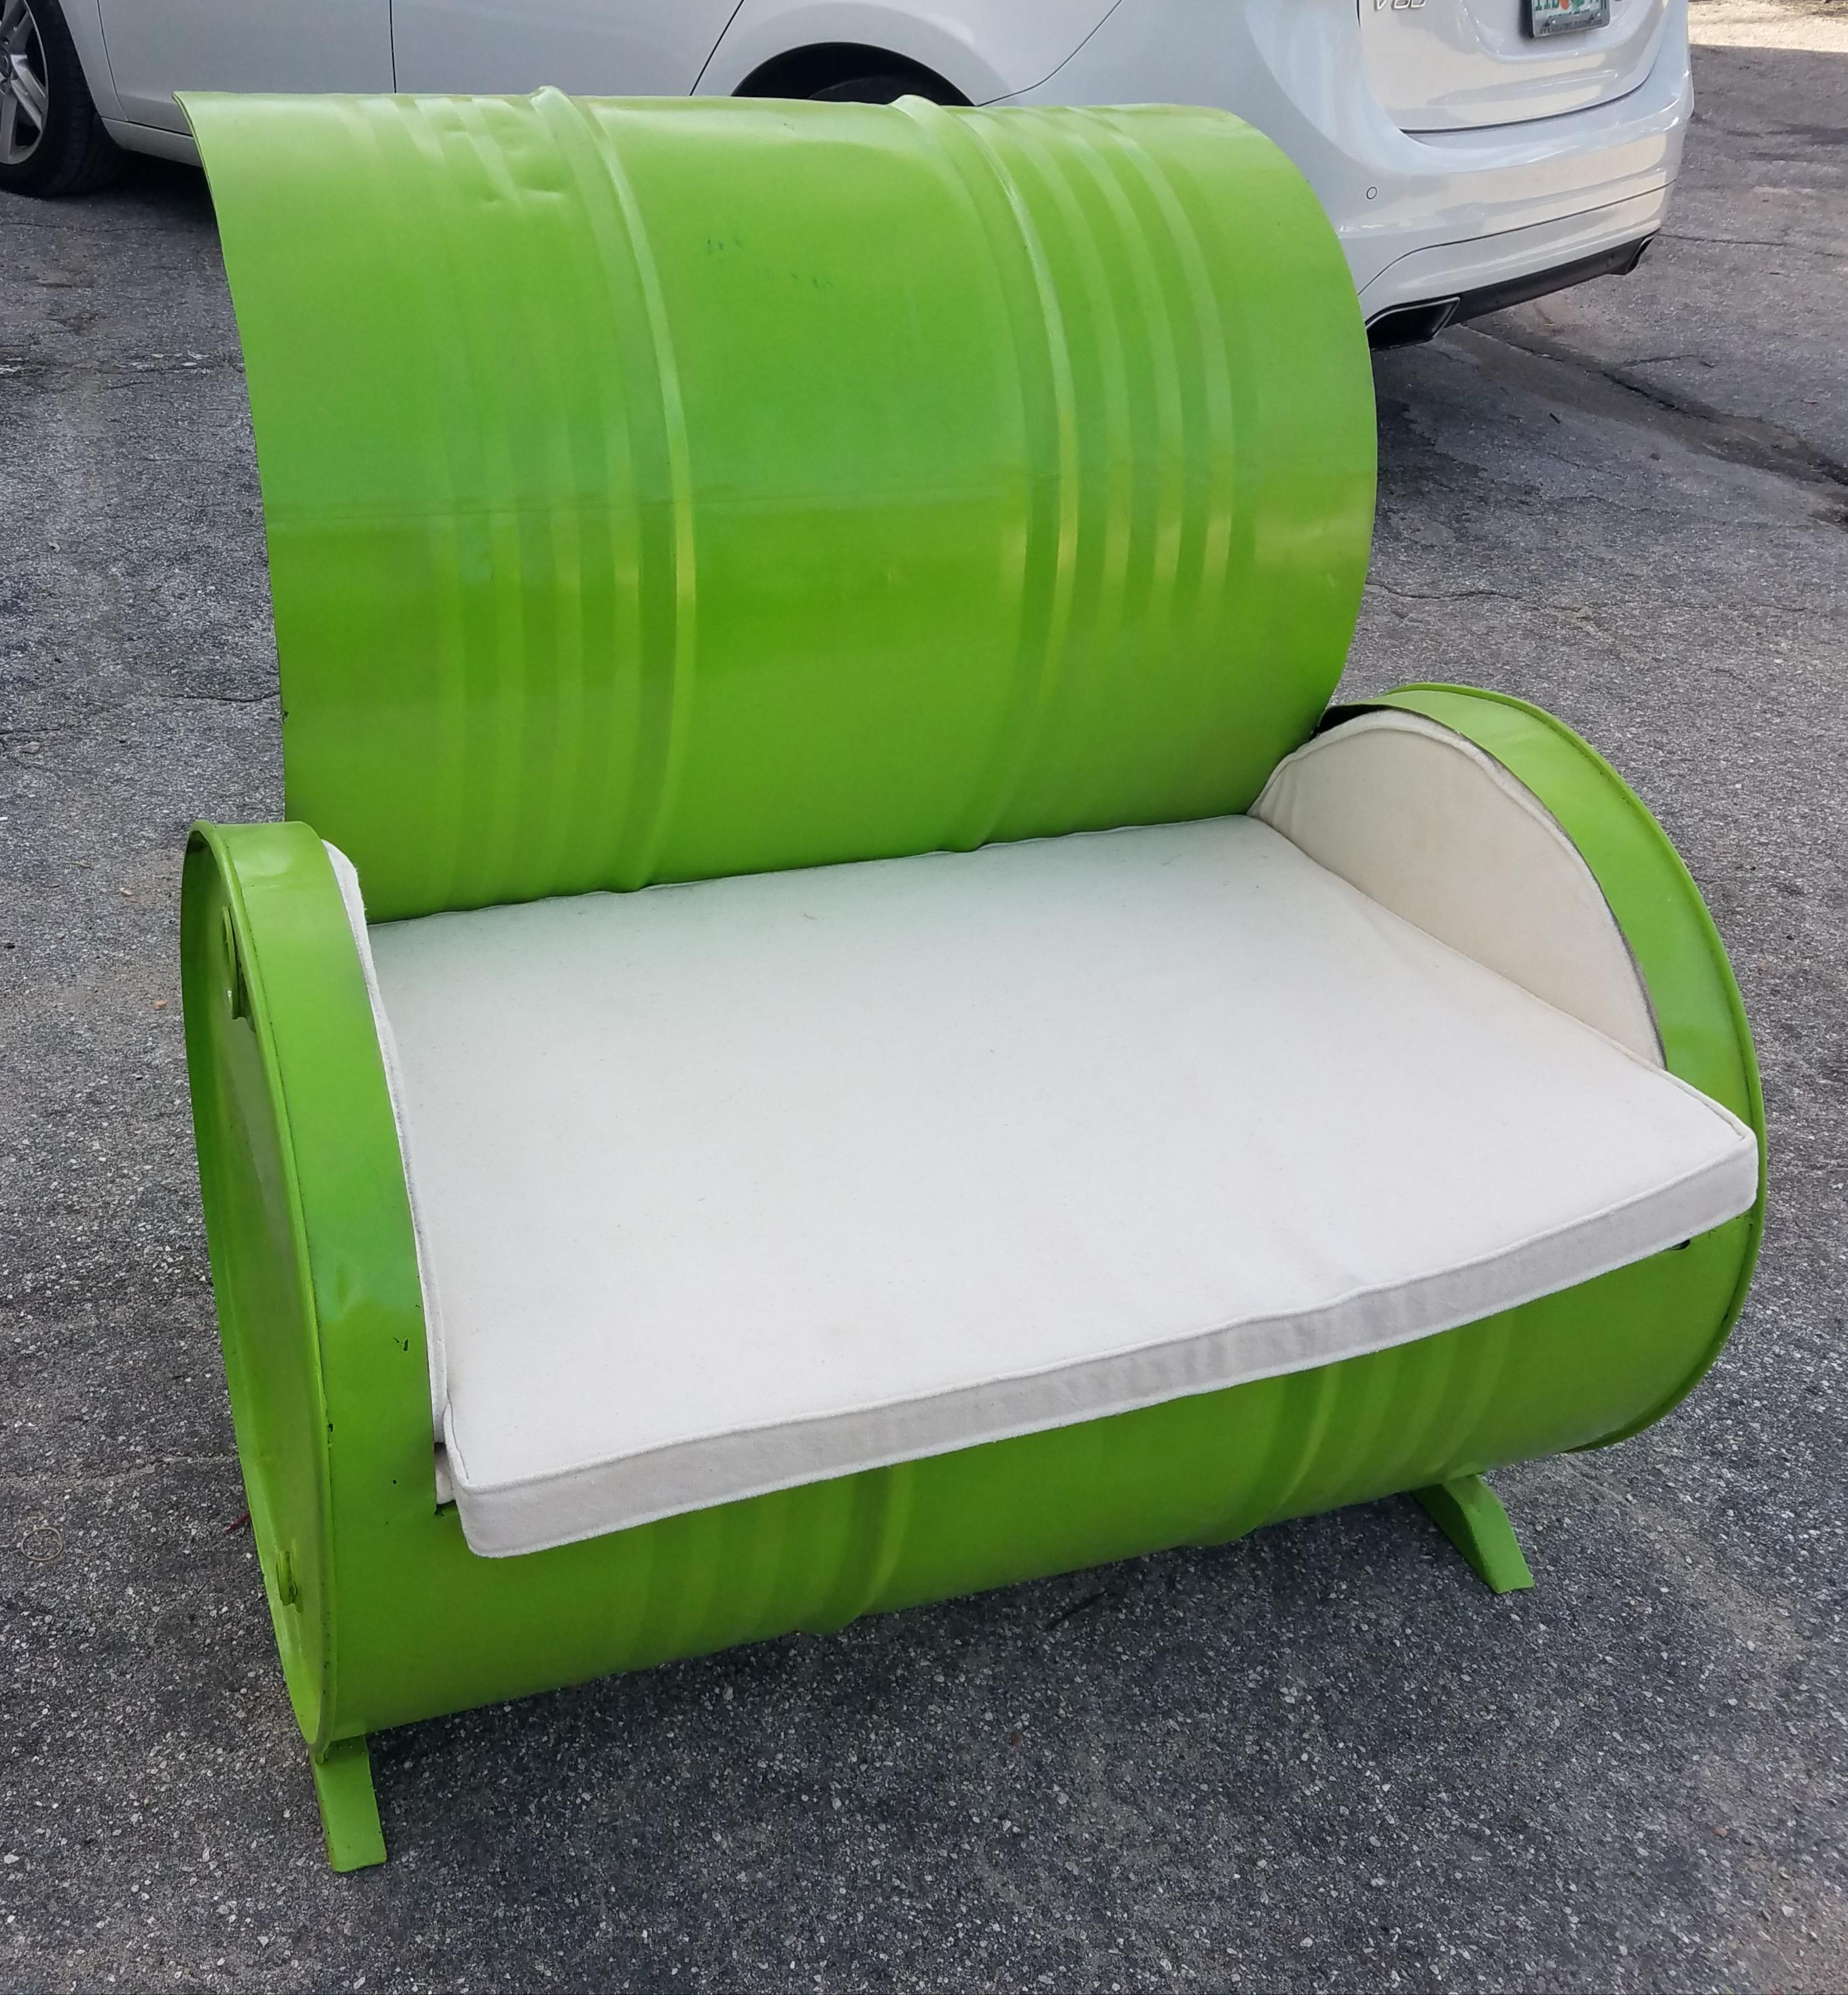 Recycled 55 Gallon Barrel Armchair, Lime Green  In Excellent Condition For Sale In Orlando, FL